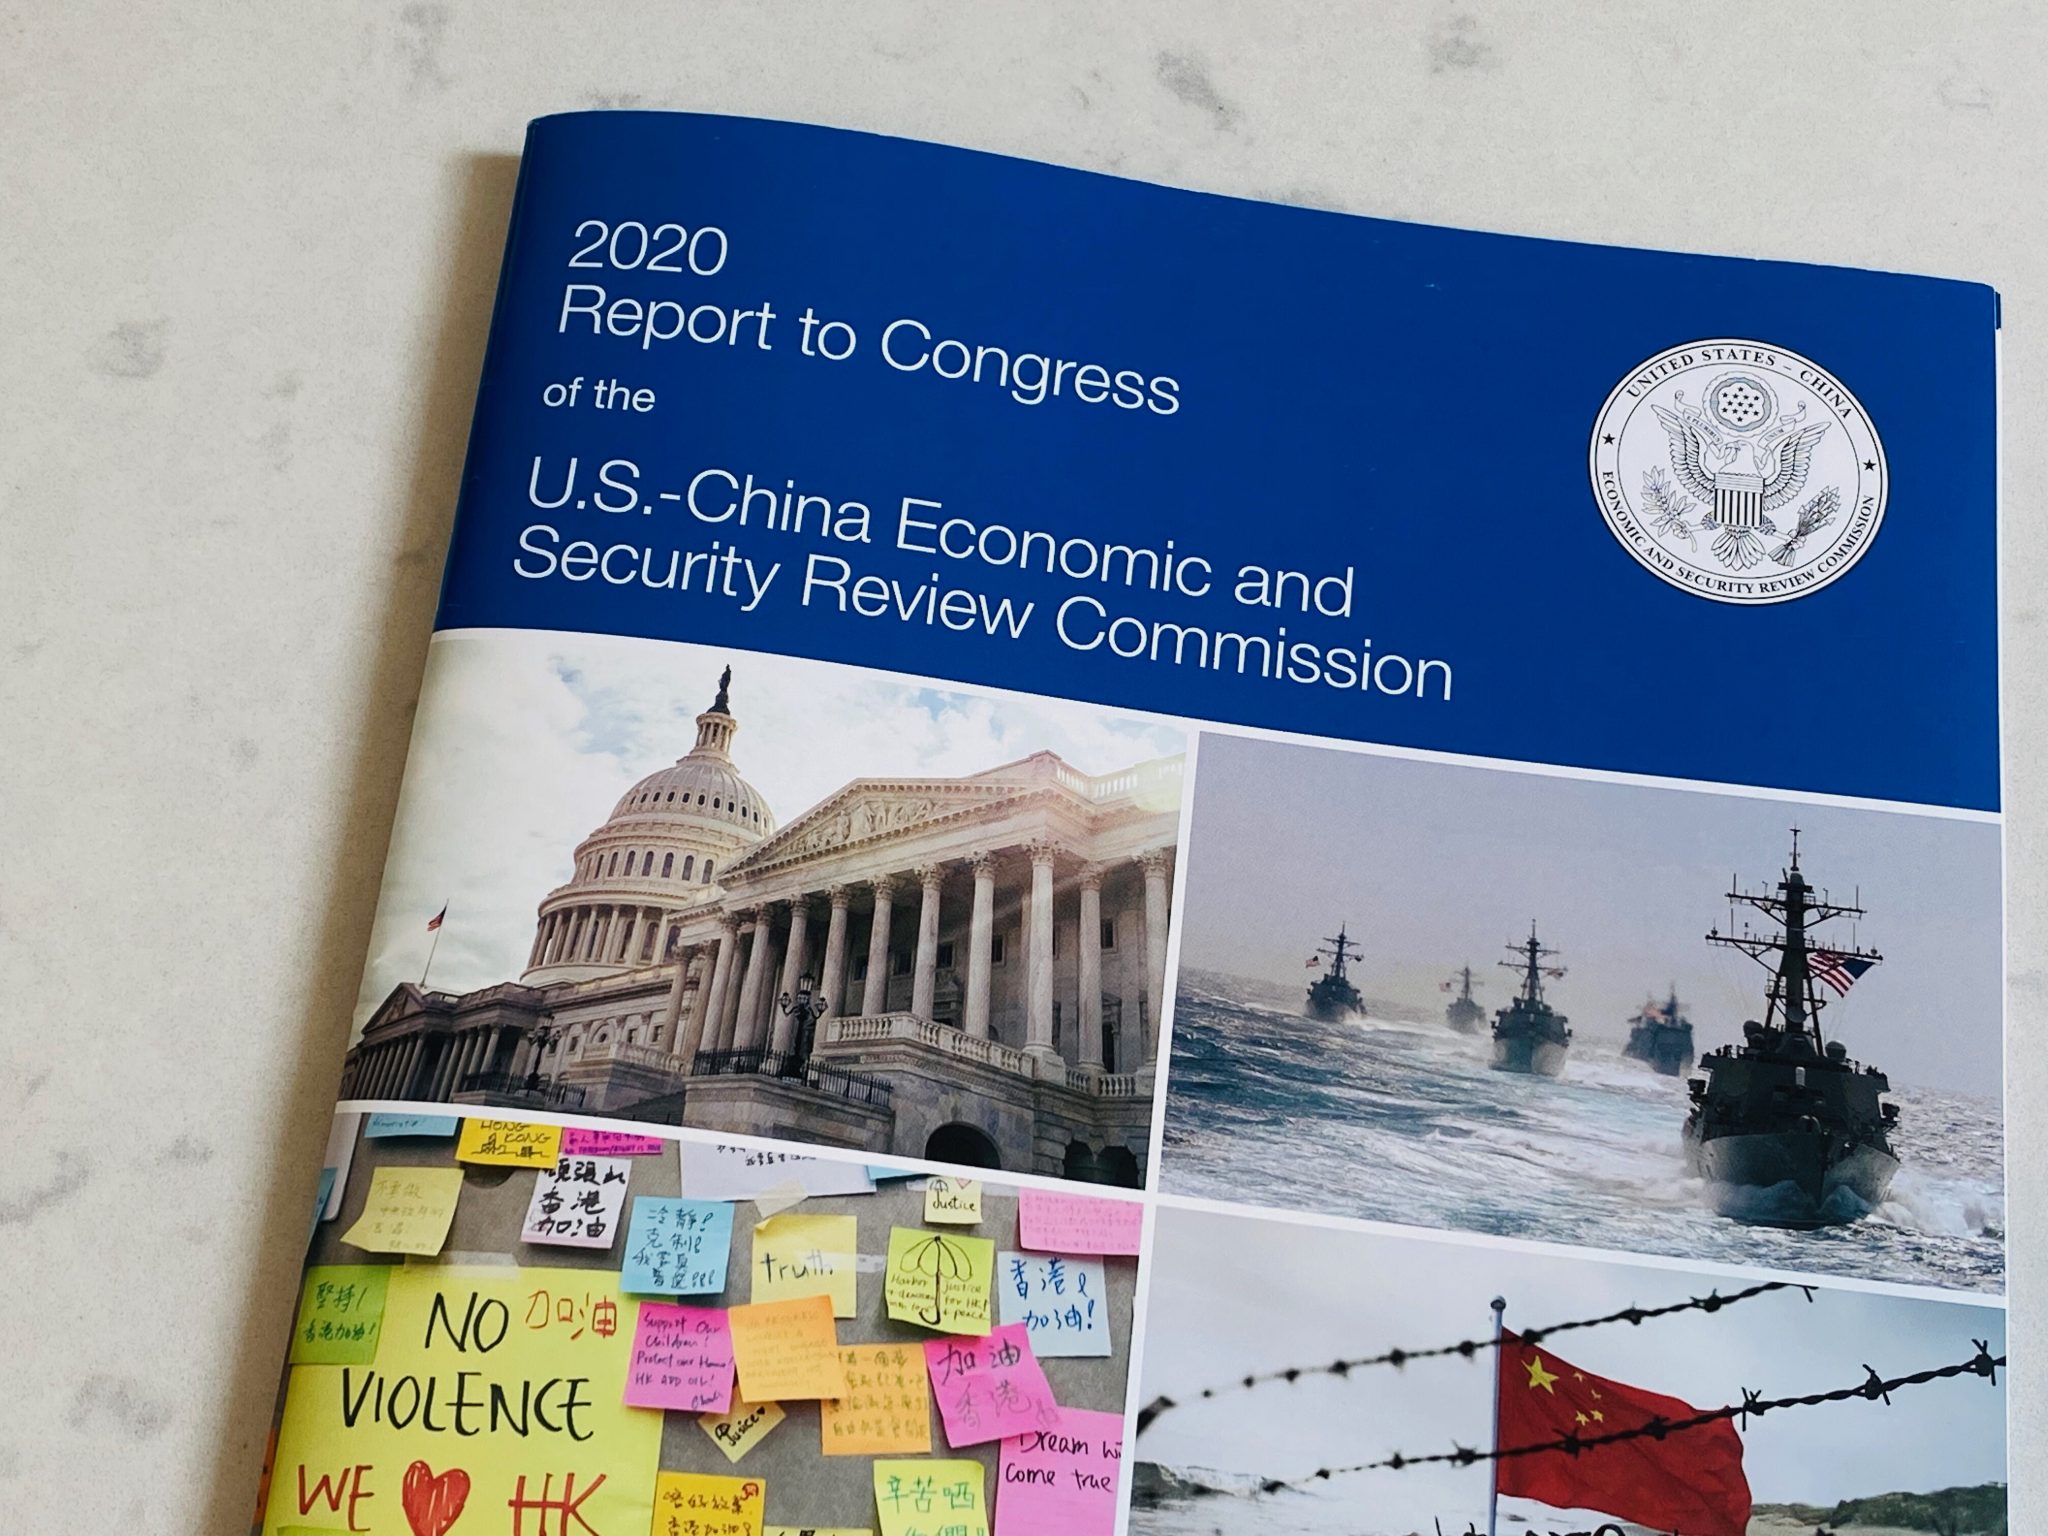 executive-summary-and-recommendations-of-the-u.s.-china-economic-and-security-review-commission-2020-annual-report-to-congress-cover